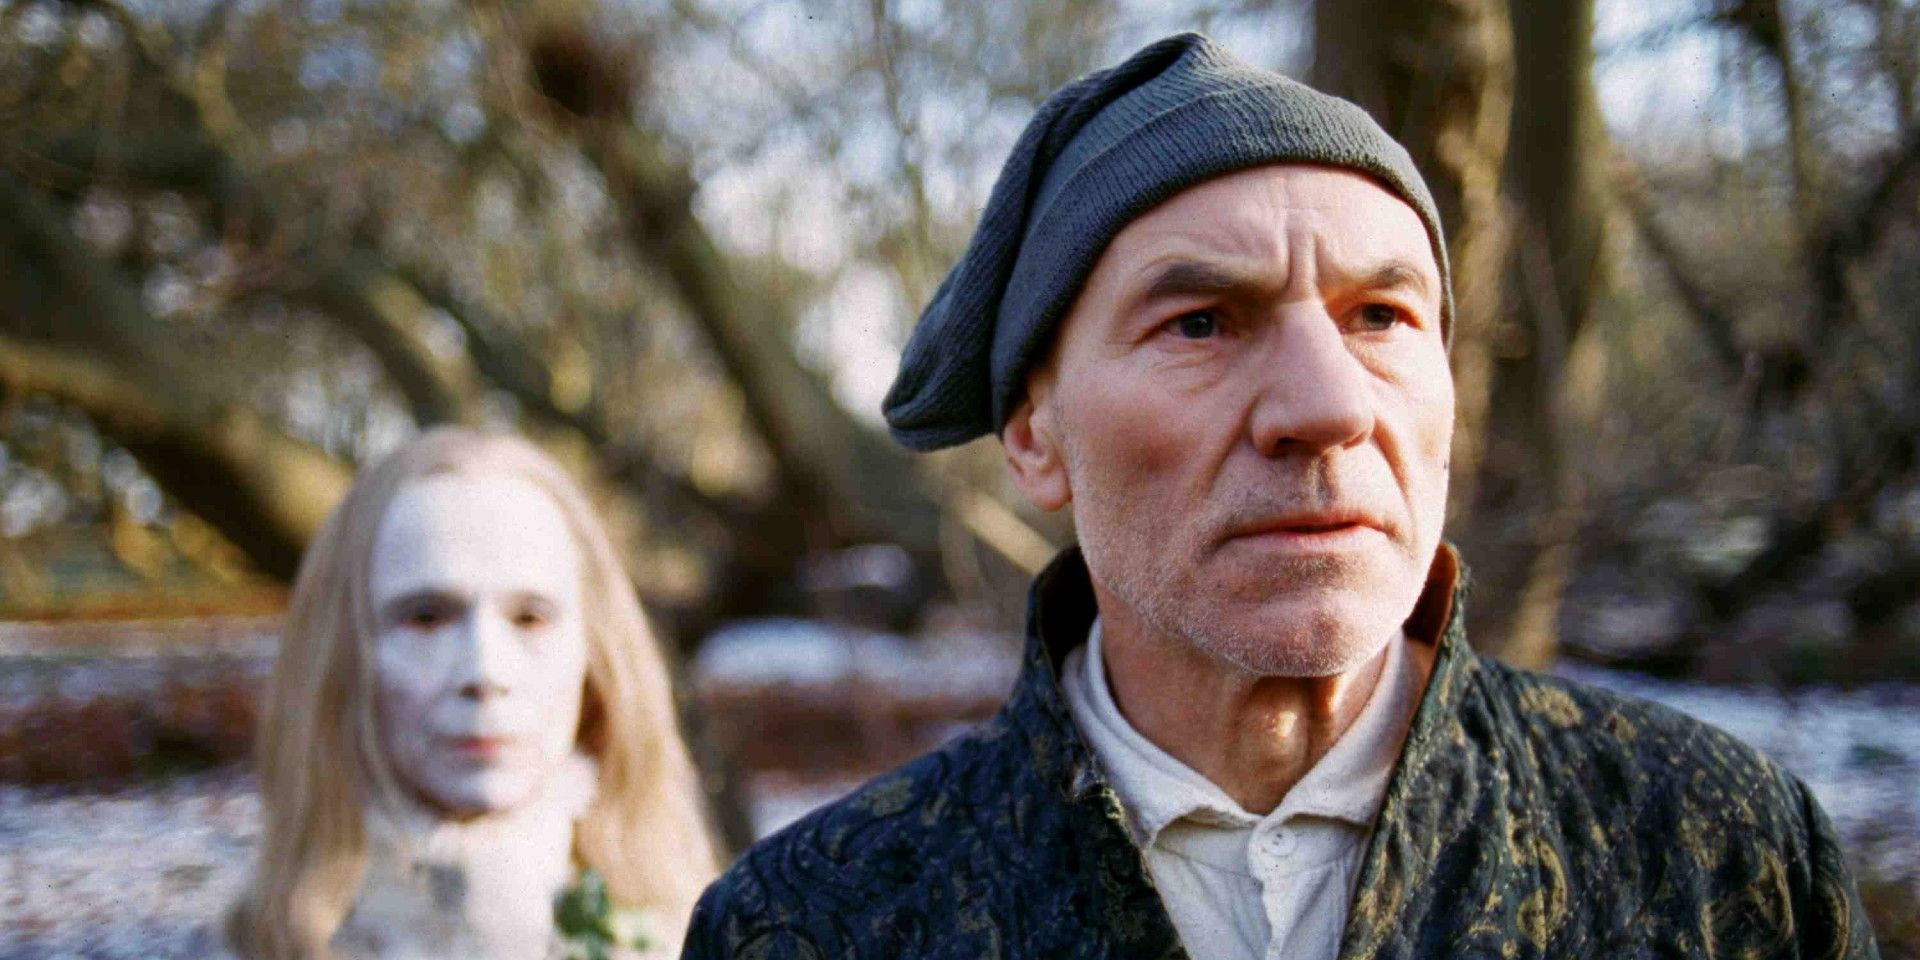 All 10 Movie Adaptations Of A Christmas Carol Ranked Worst To Best